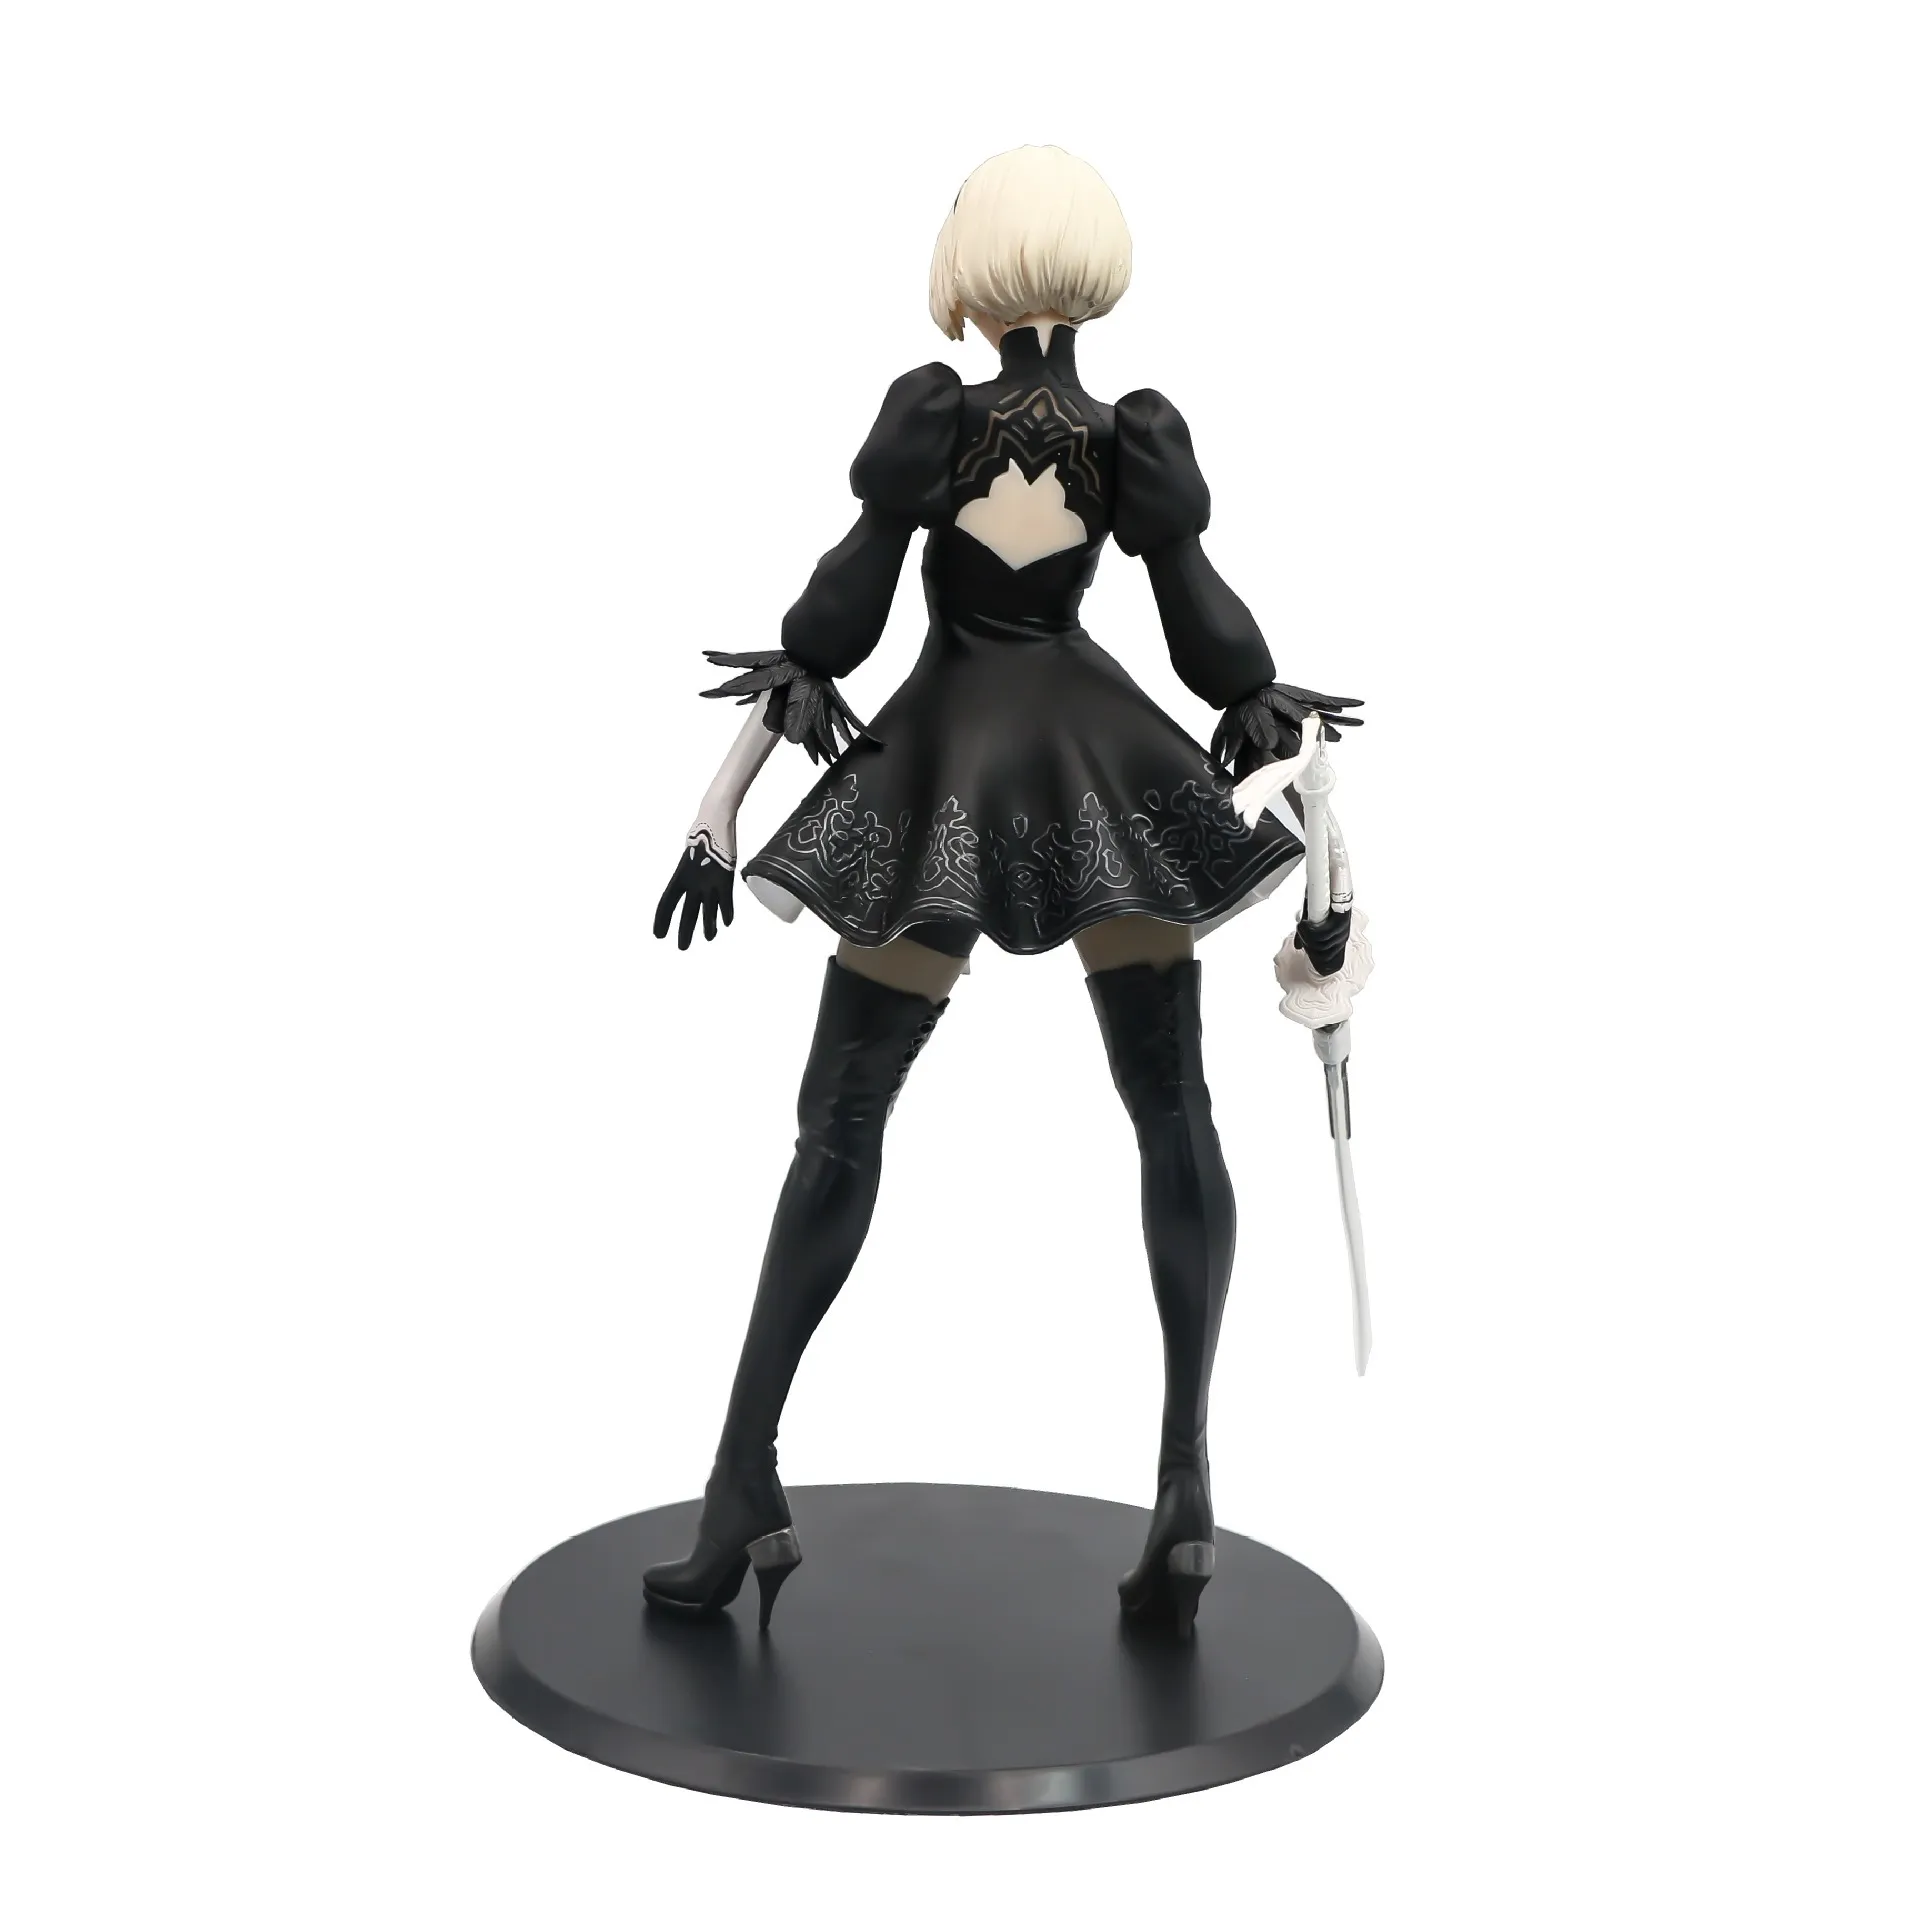 Extremely Expensive & Affordable NieR: Automata 2B Figures